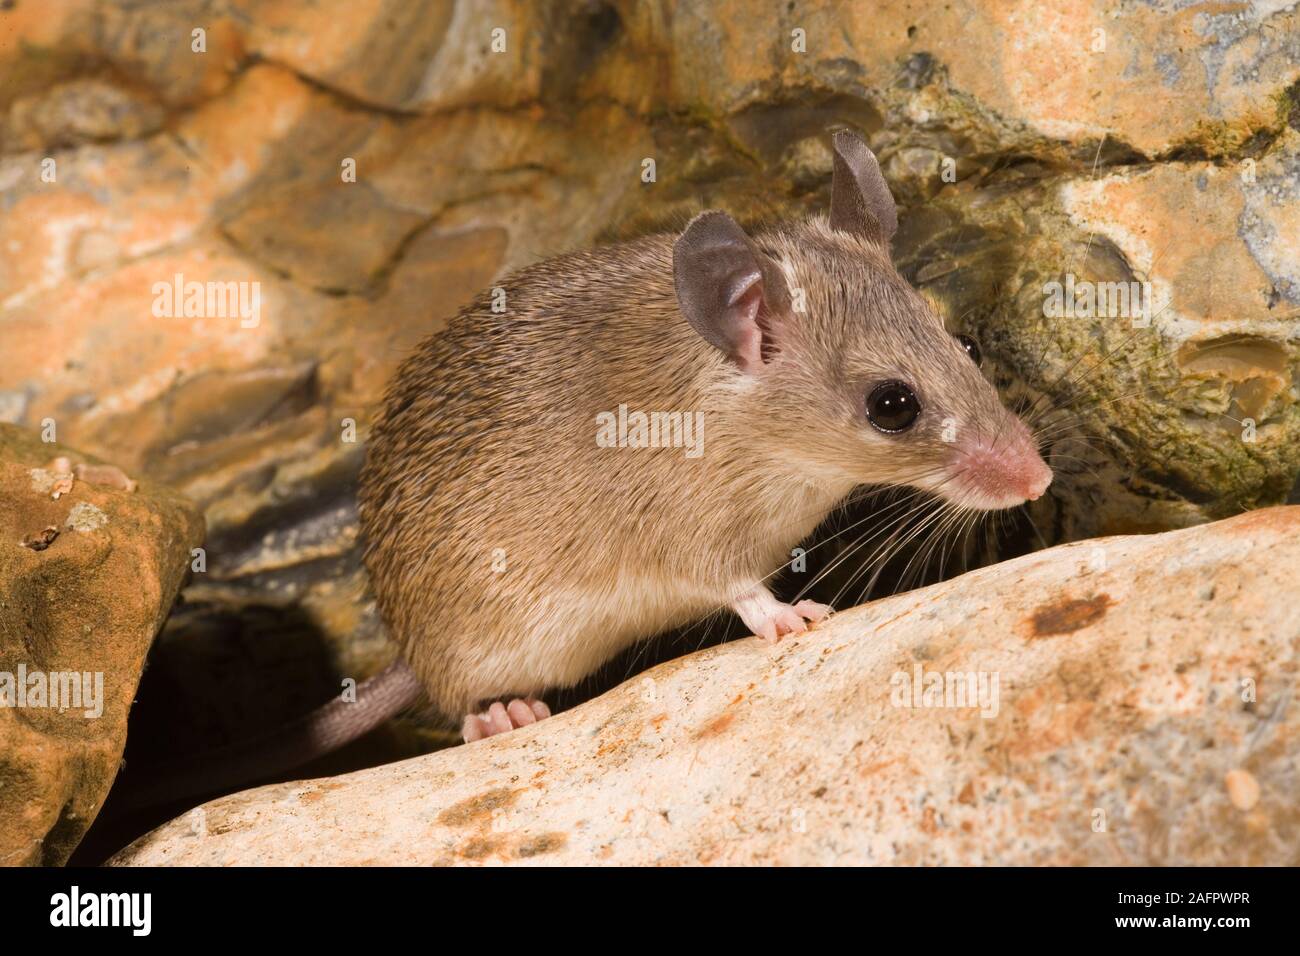 TURKISH SPINY MOUSE Acomys cilicicus Critically Endangered. Fewer than 250 in the wild, now confined to one mountain side in Turkey (2007). Stock Photo